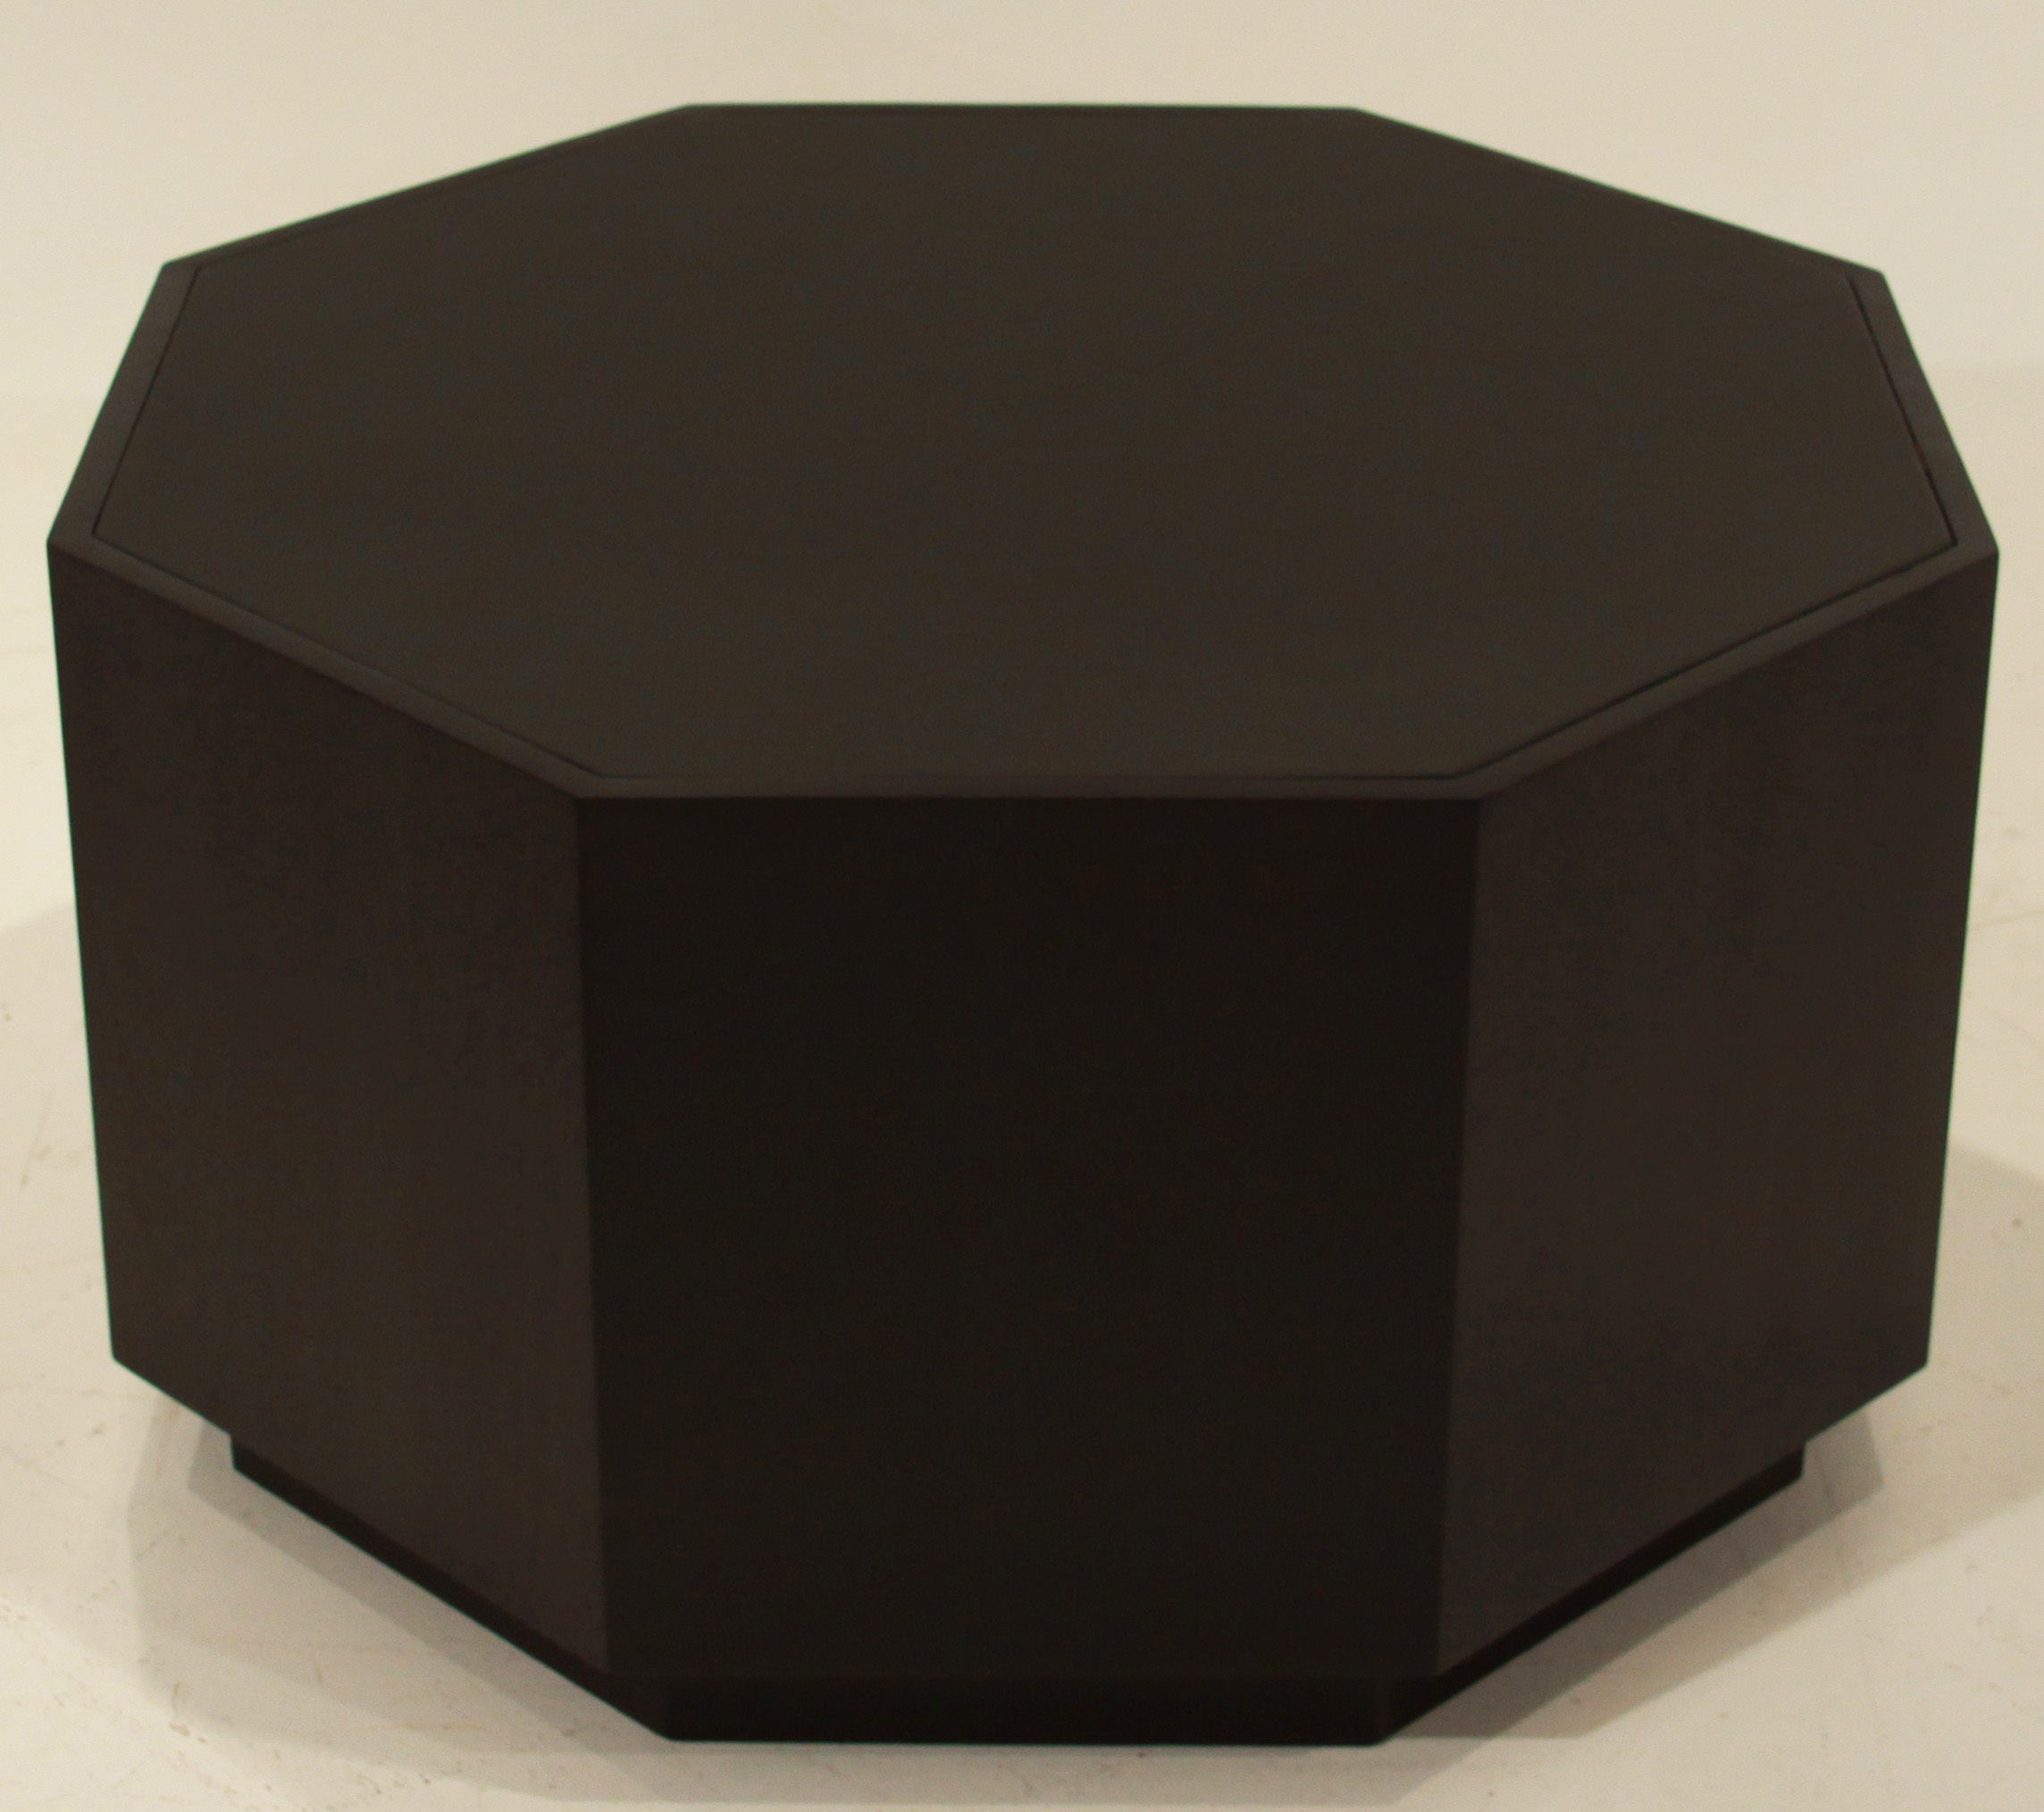 The Octagon Table by Thomas Hayes Studio